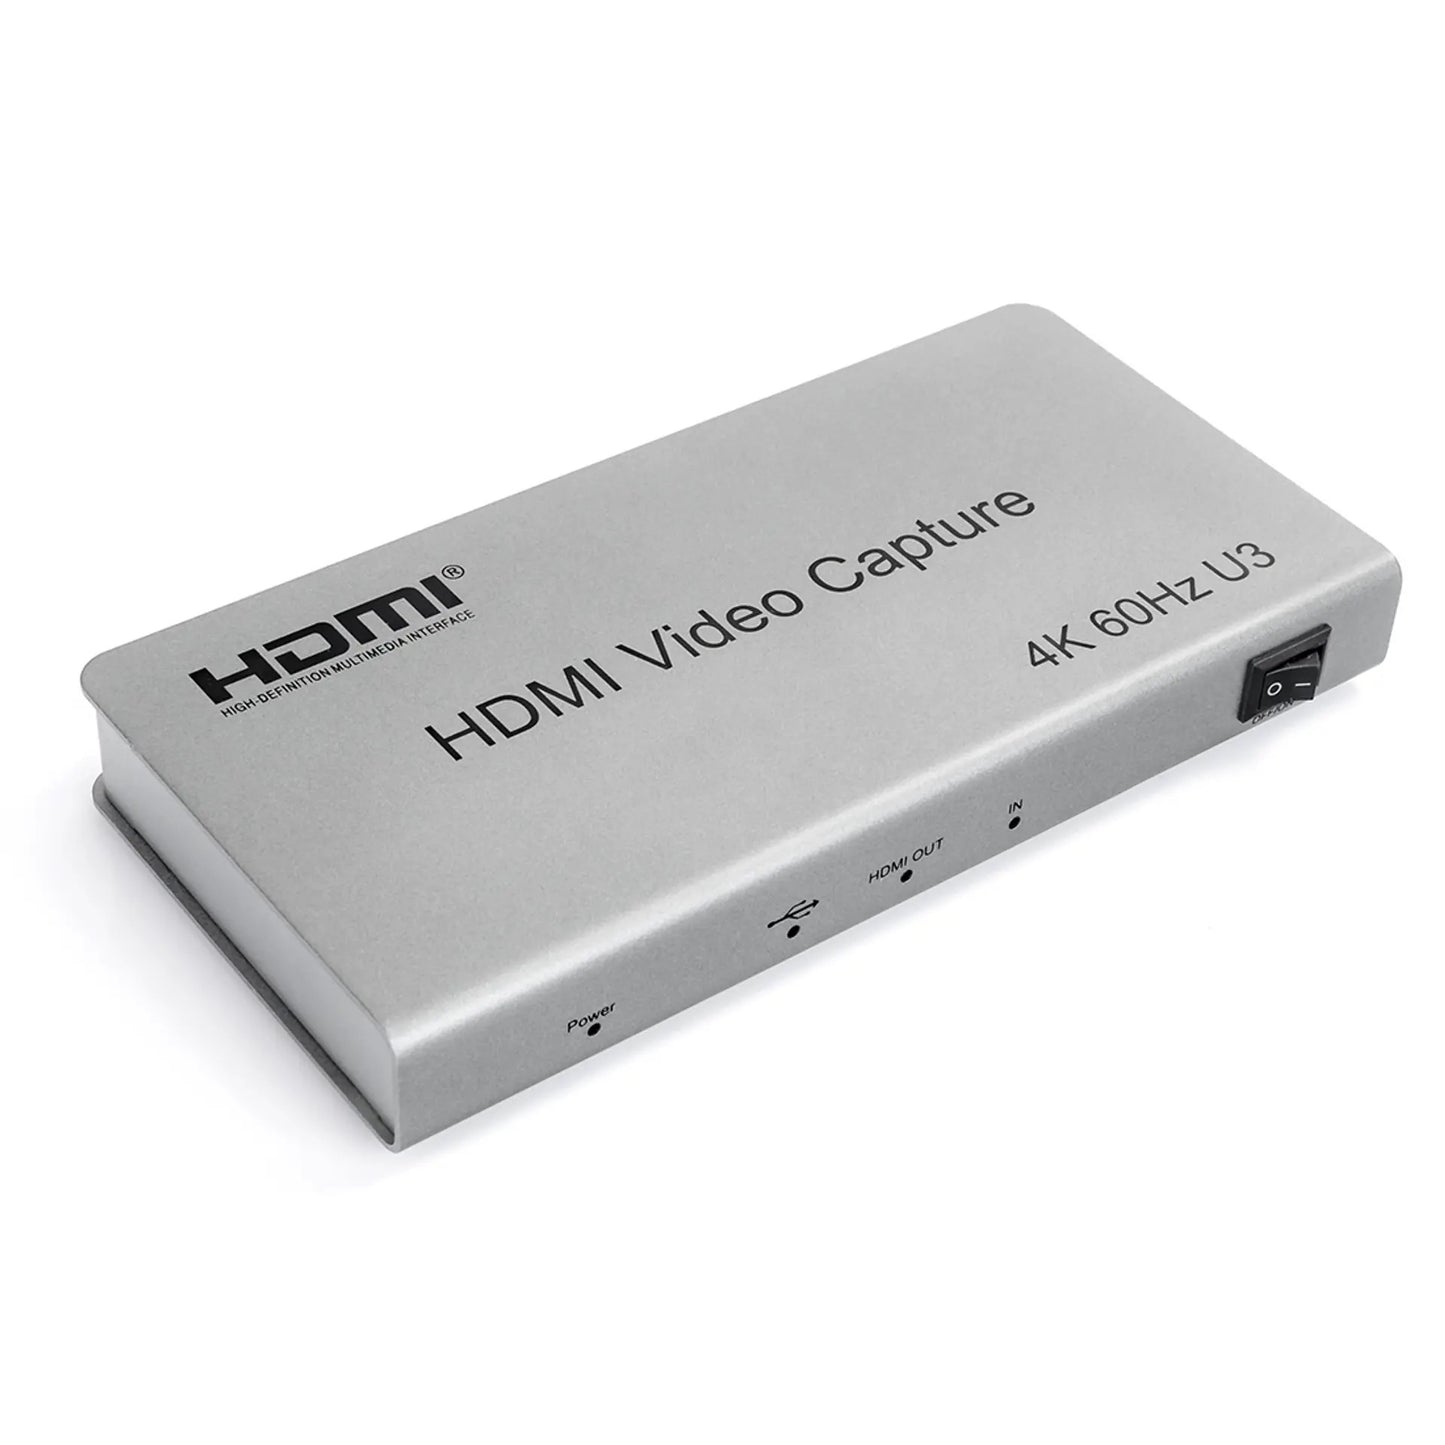 ArgoX HDVC9 4K 60Hz HDMI Video Capture U3 with Loop, Power Adapter USB, USB3.0 Cable, RCA Port, Supports 6Gbps Data Rate and TMDS Clock, Deep Color, AWG26 HMDI, Uncompressed YUY2, and VLC/OBS/Amcap